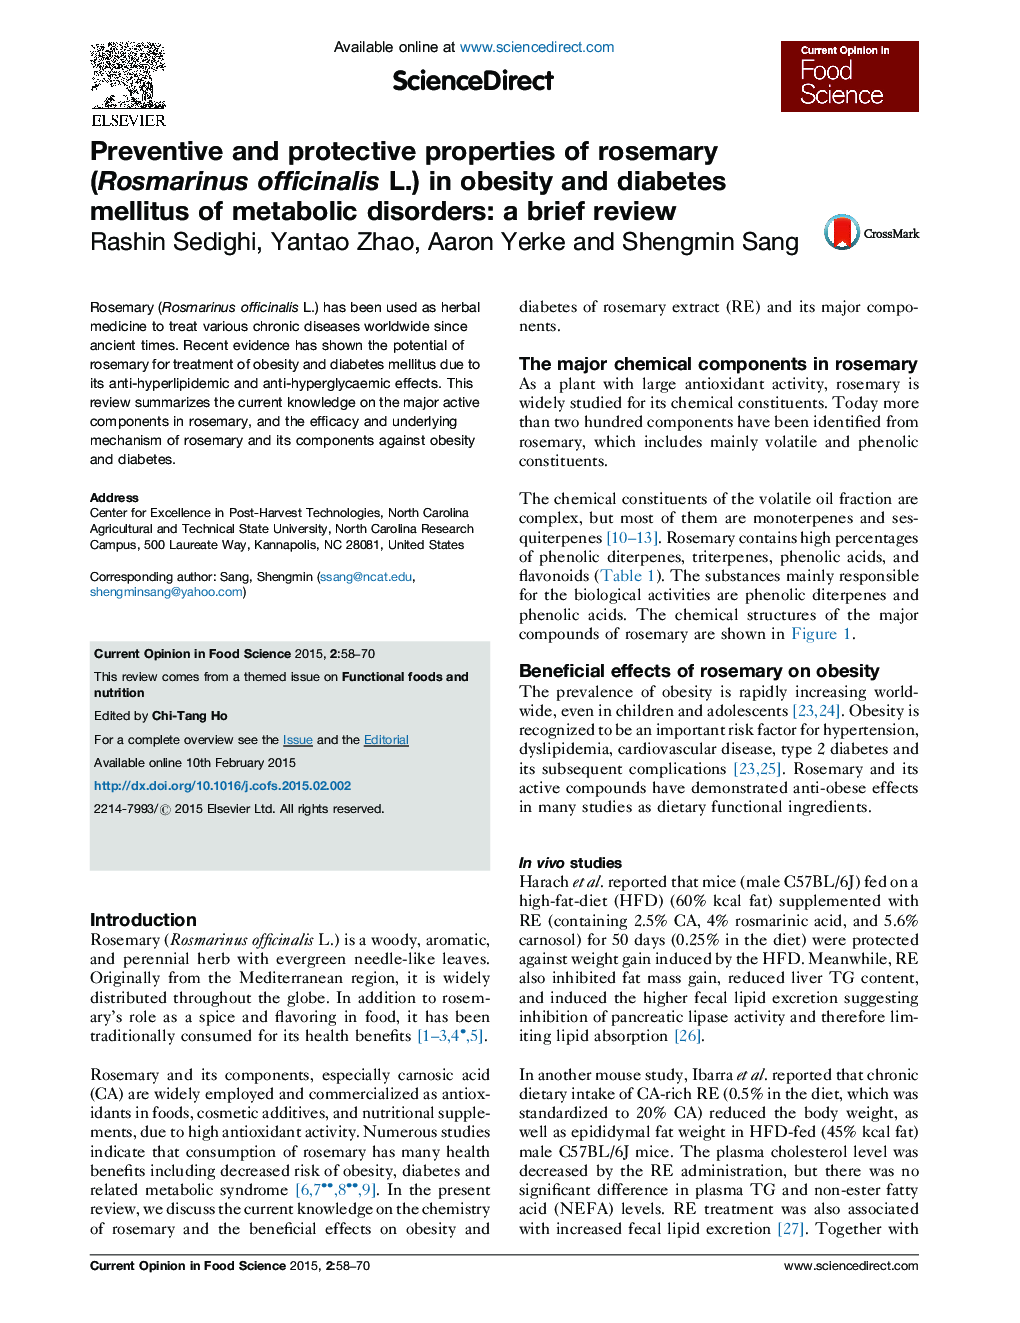 Preventive and protective properties of rosemary (Rosmarinus officinalis L.) in obesity and diabetes mellitus of metabolic disorders: a brief review